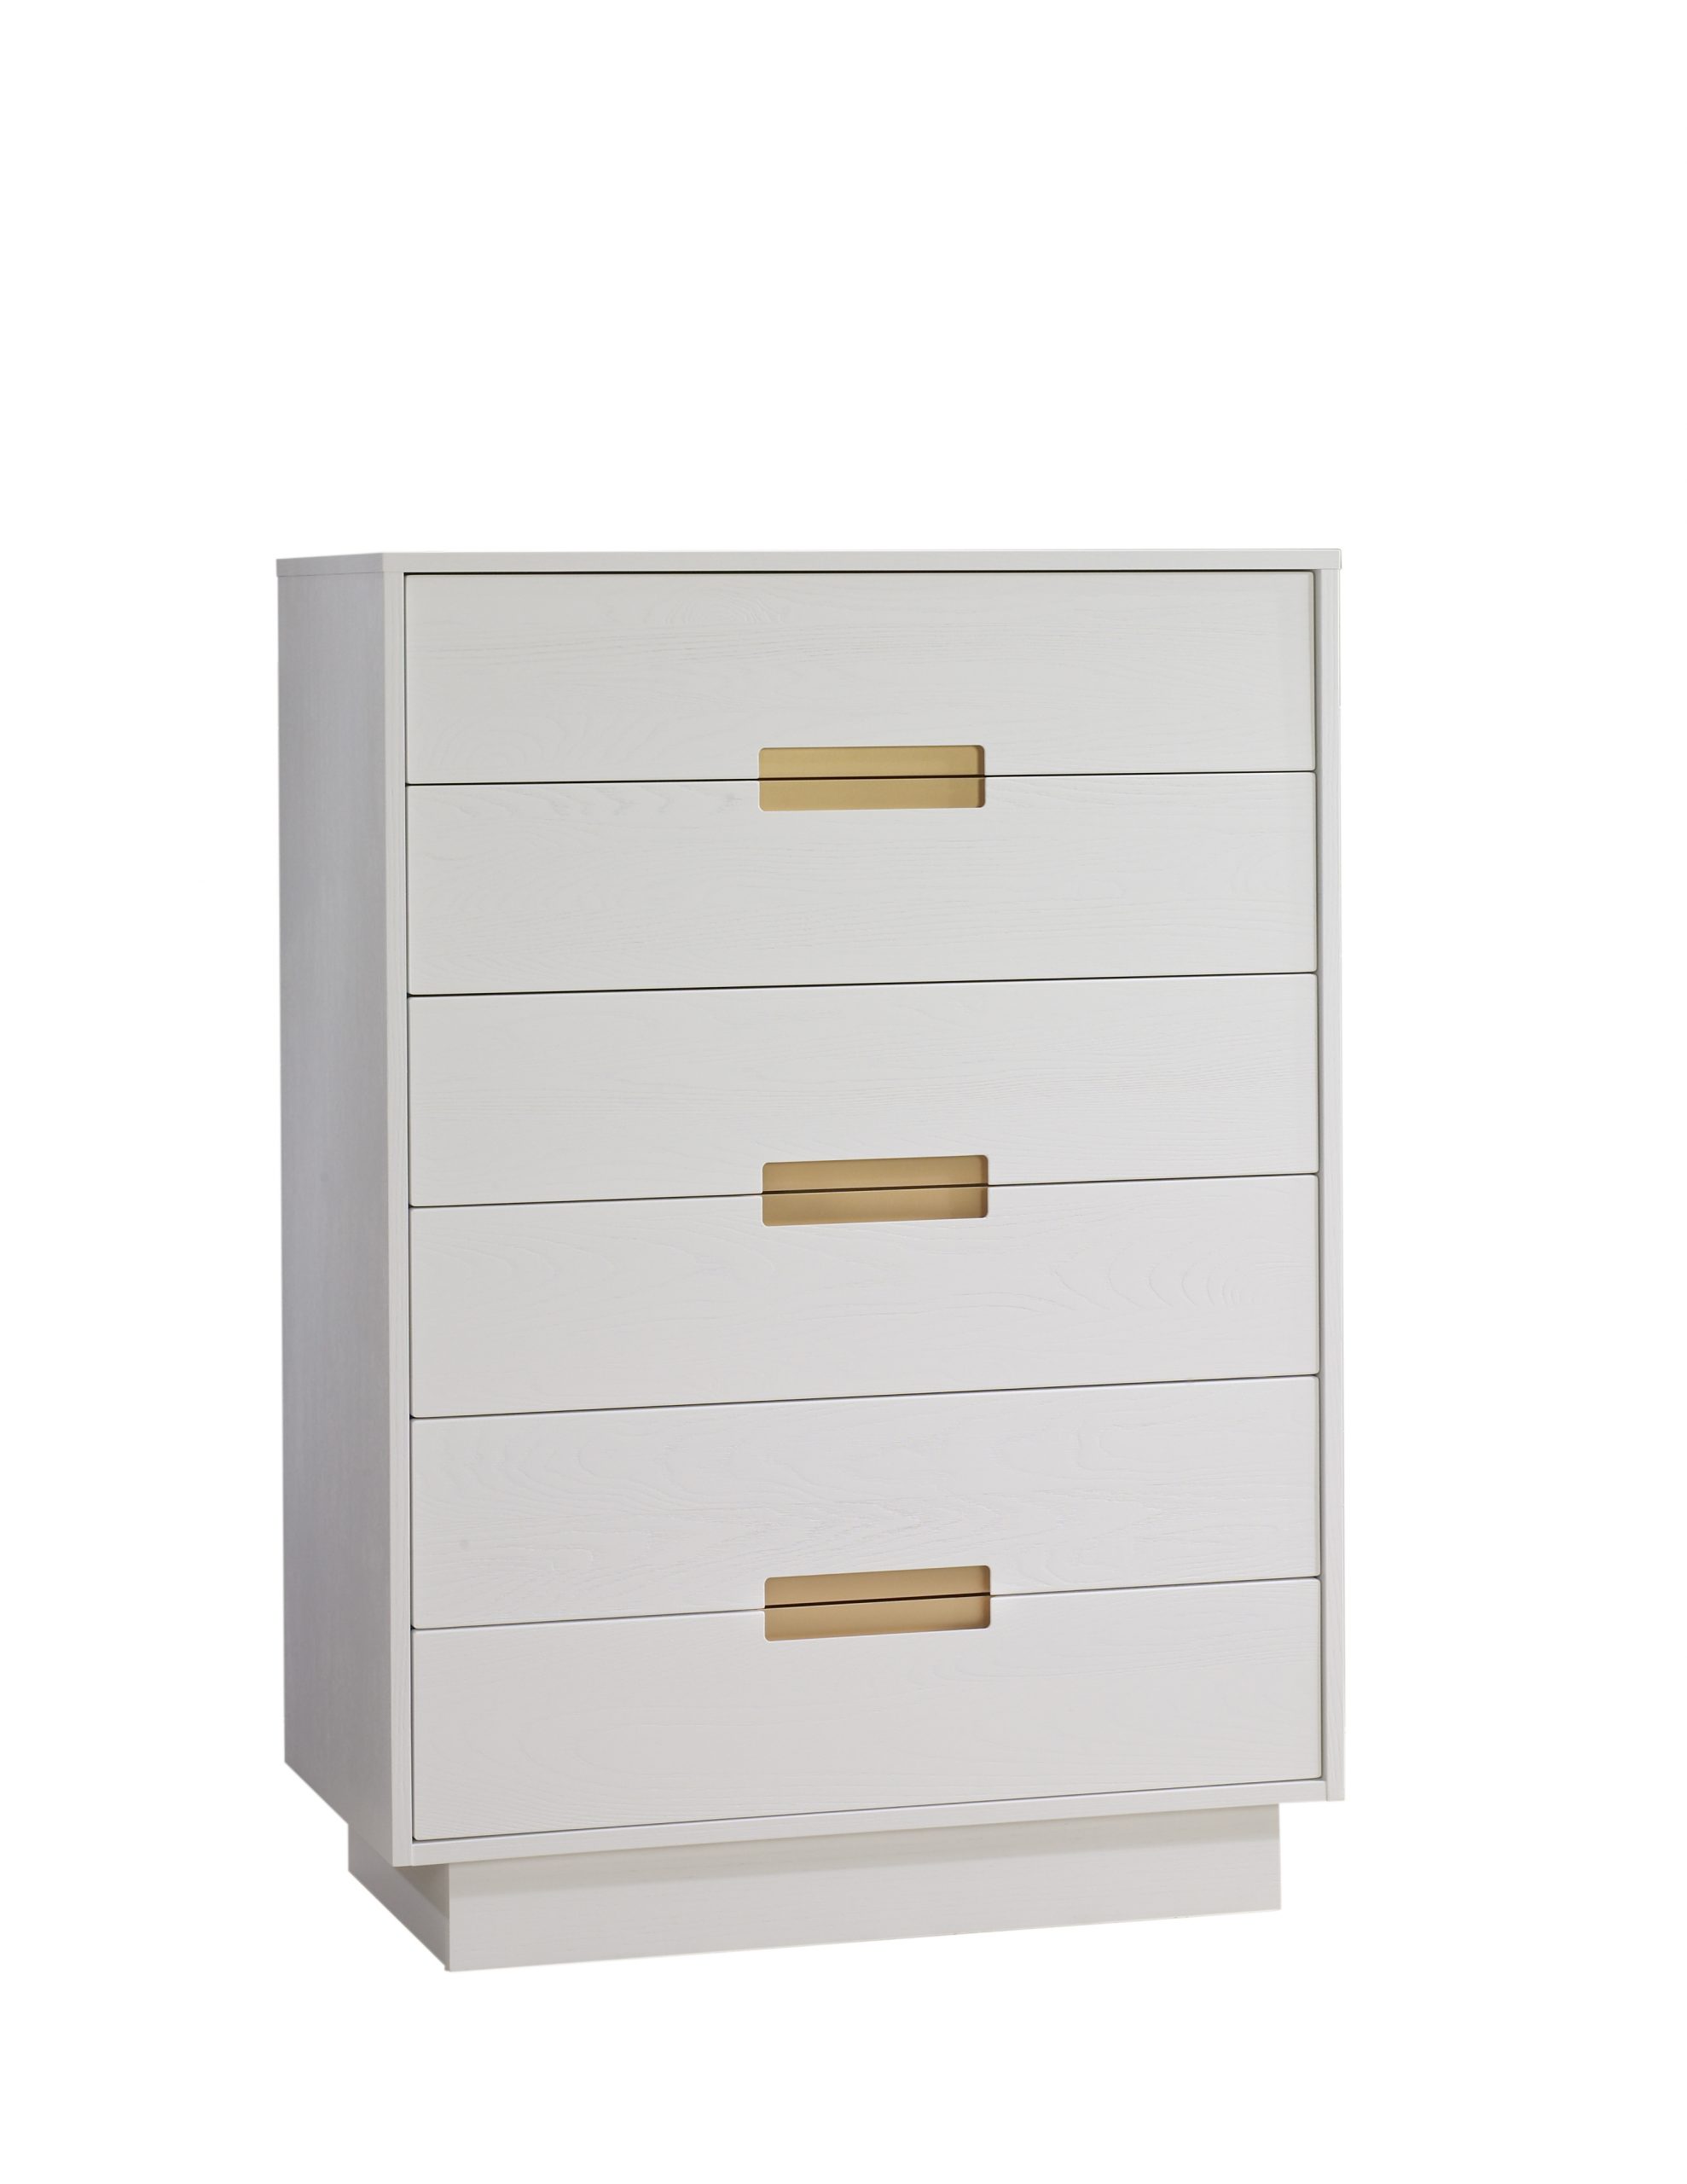 Como 6 Drawer Tall Chest (with 6 drawers instead of only 5) in White